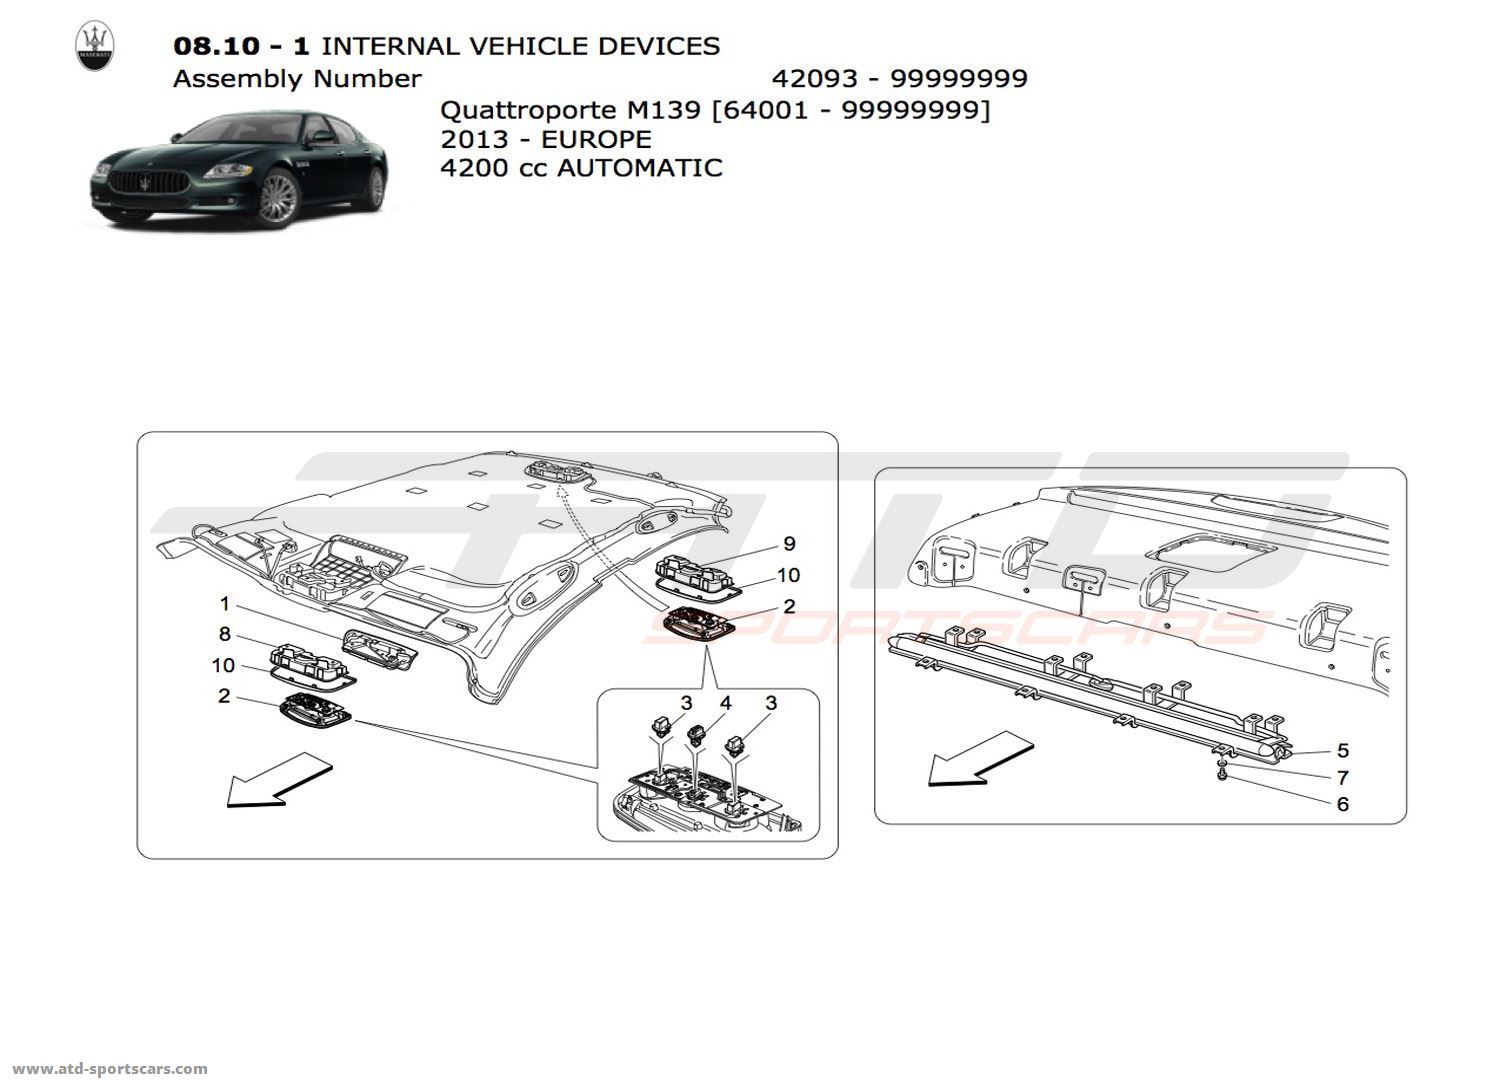 INTERNAL VEHICLE DEVICES